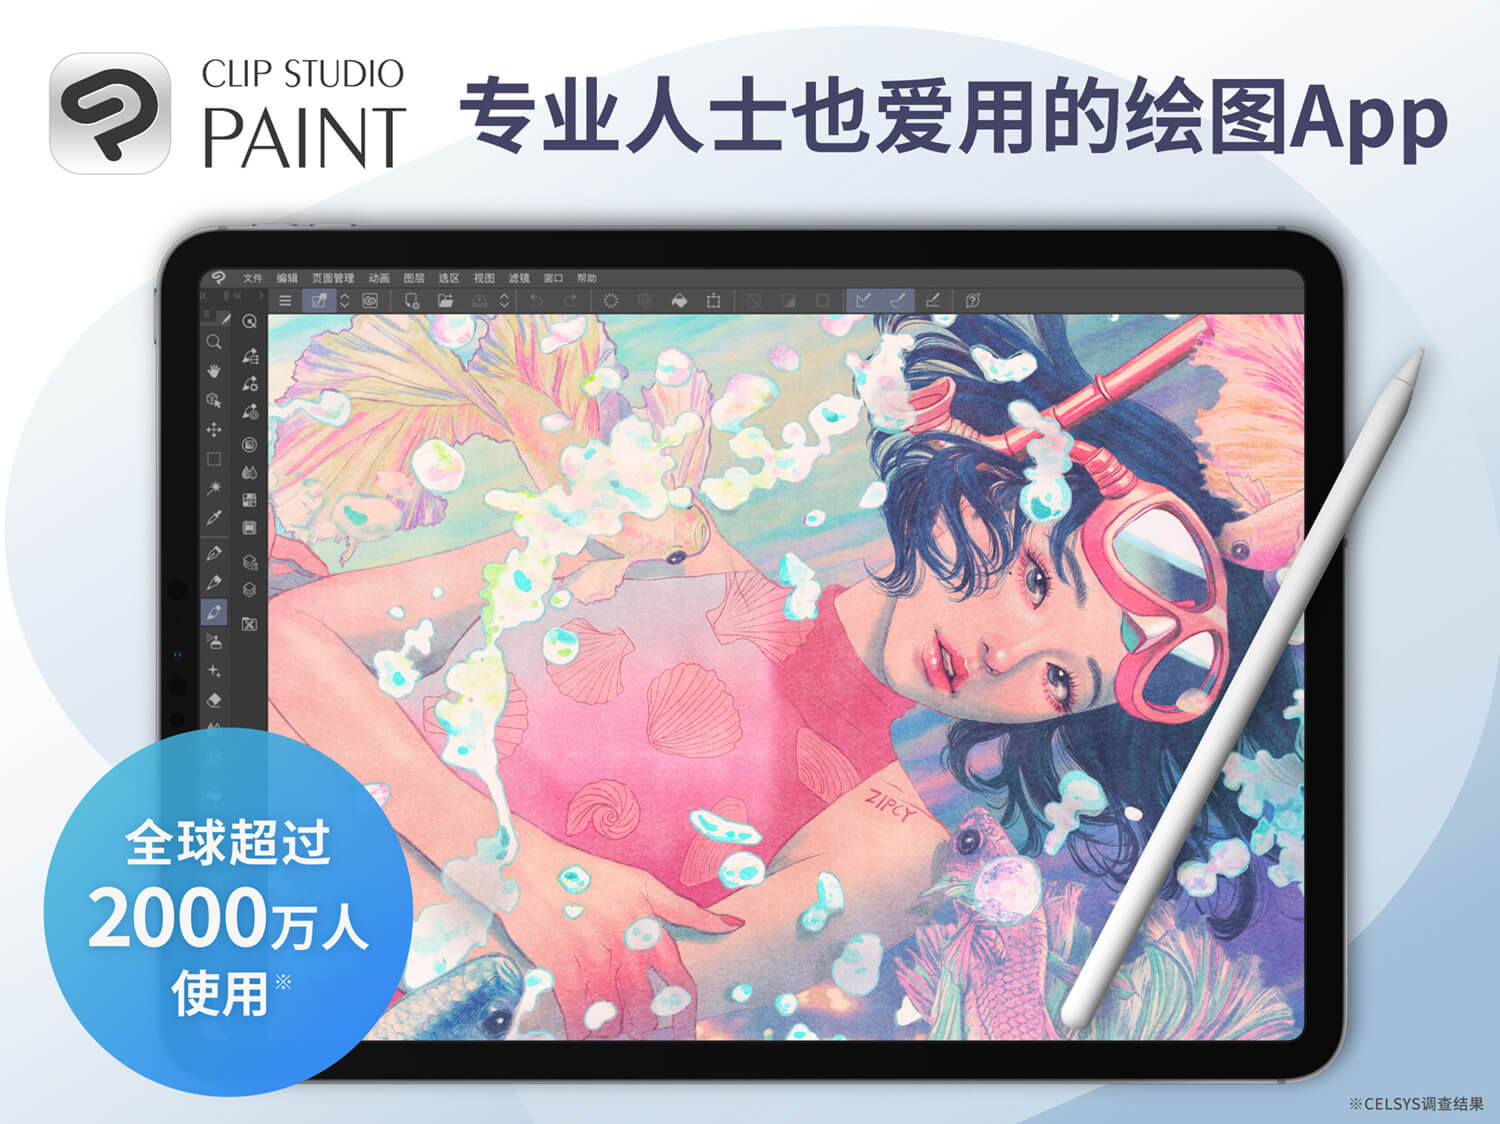 Clip Studio Paint for iPad now available in China